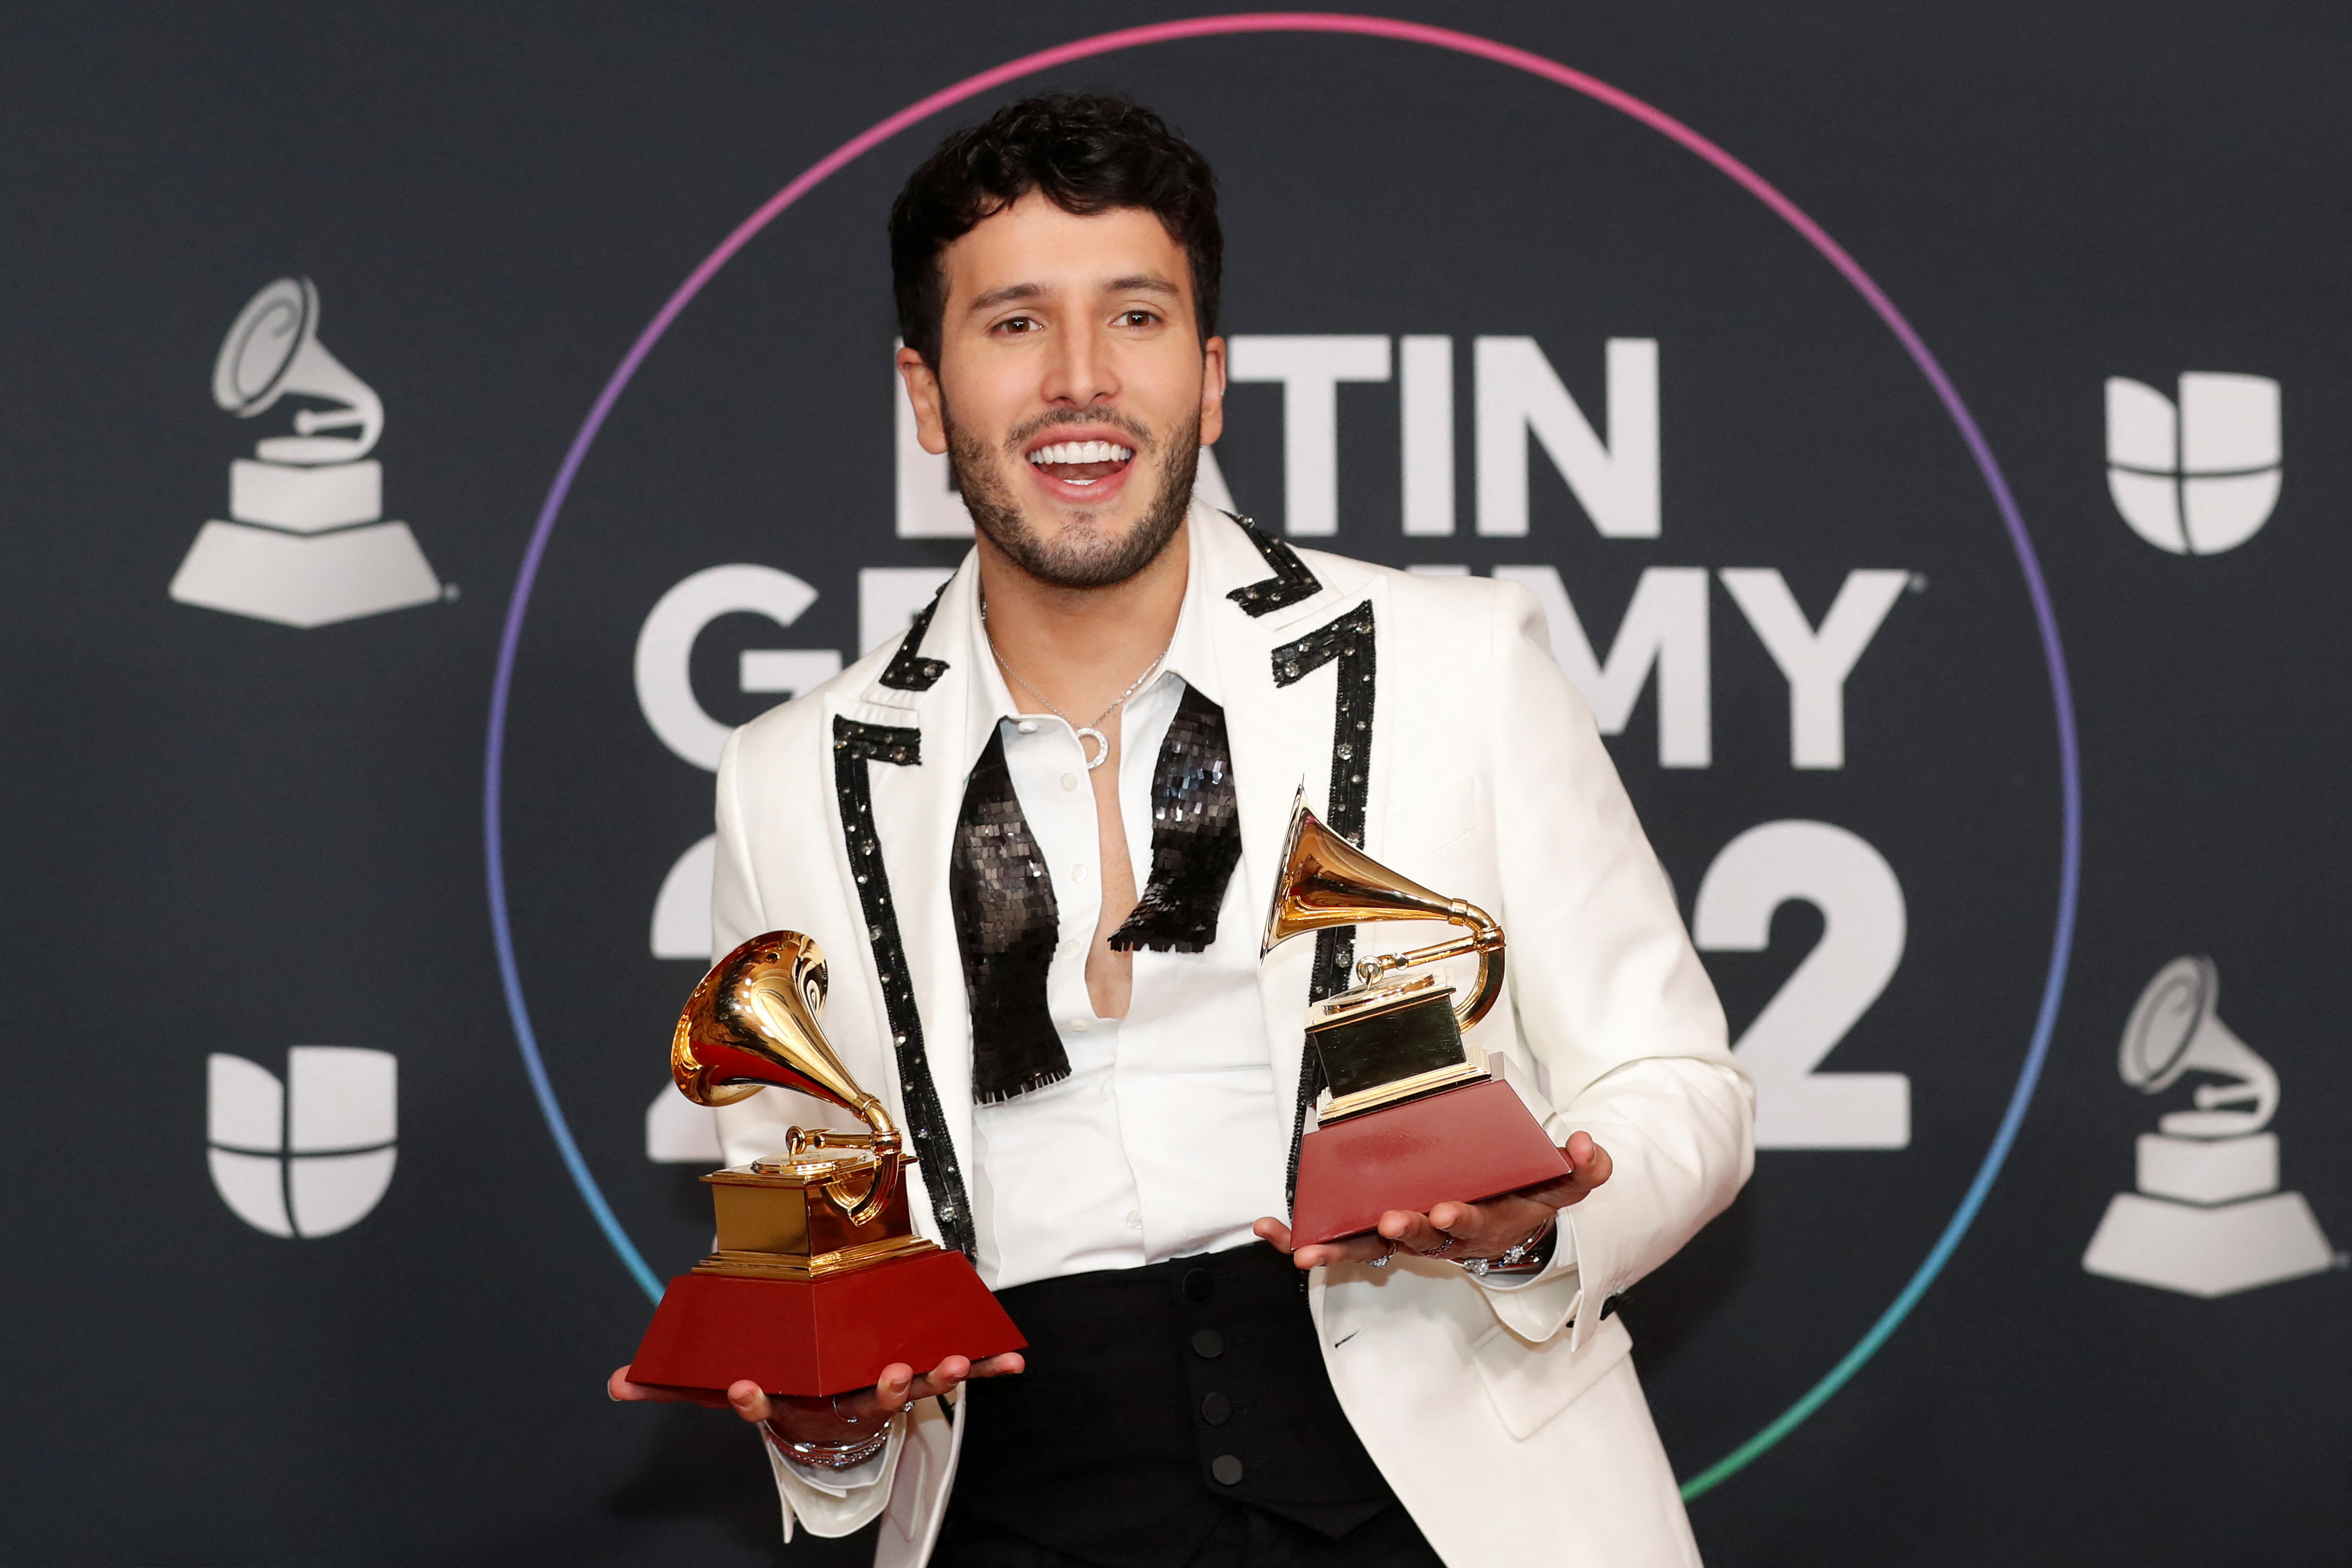 Sebastian Yatra poses with his awards in the photo room during the 23rd Annual Latin Grammy Awards show in Las Vegas, Nevada, U.S., November 17, 2022. REUTERS/Steve Marcus